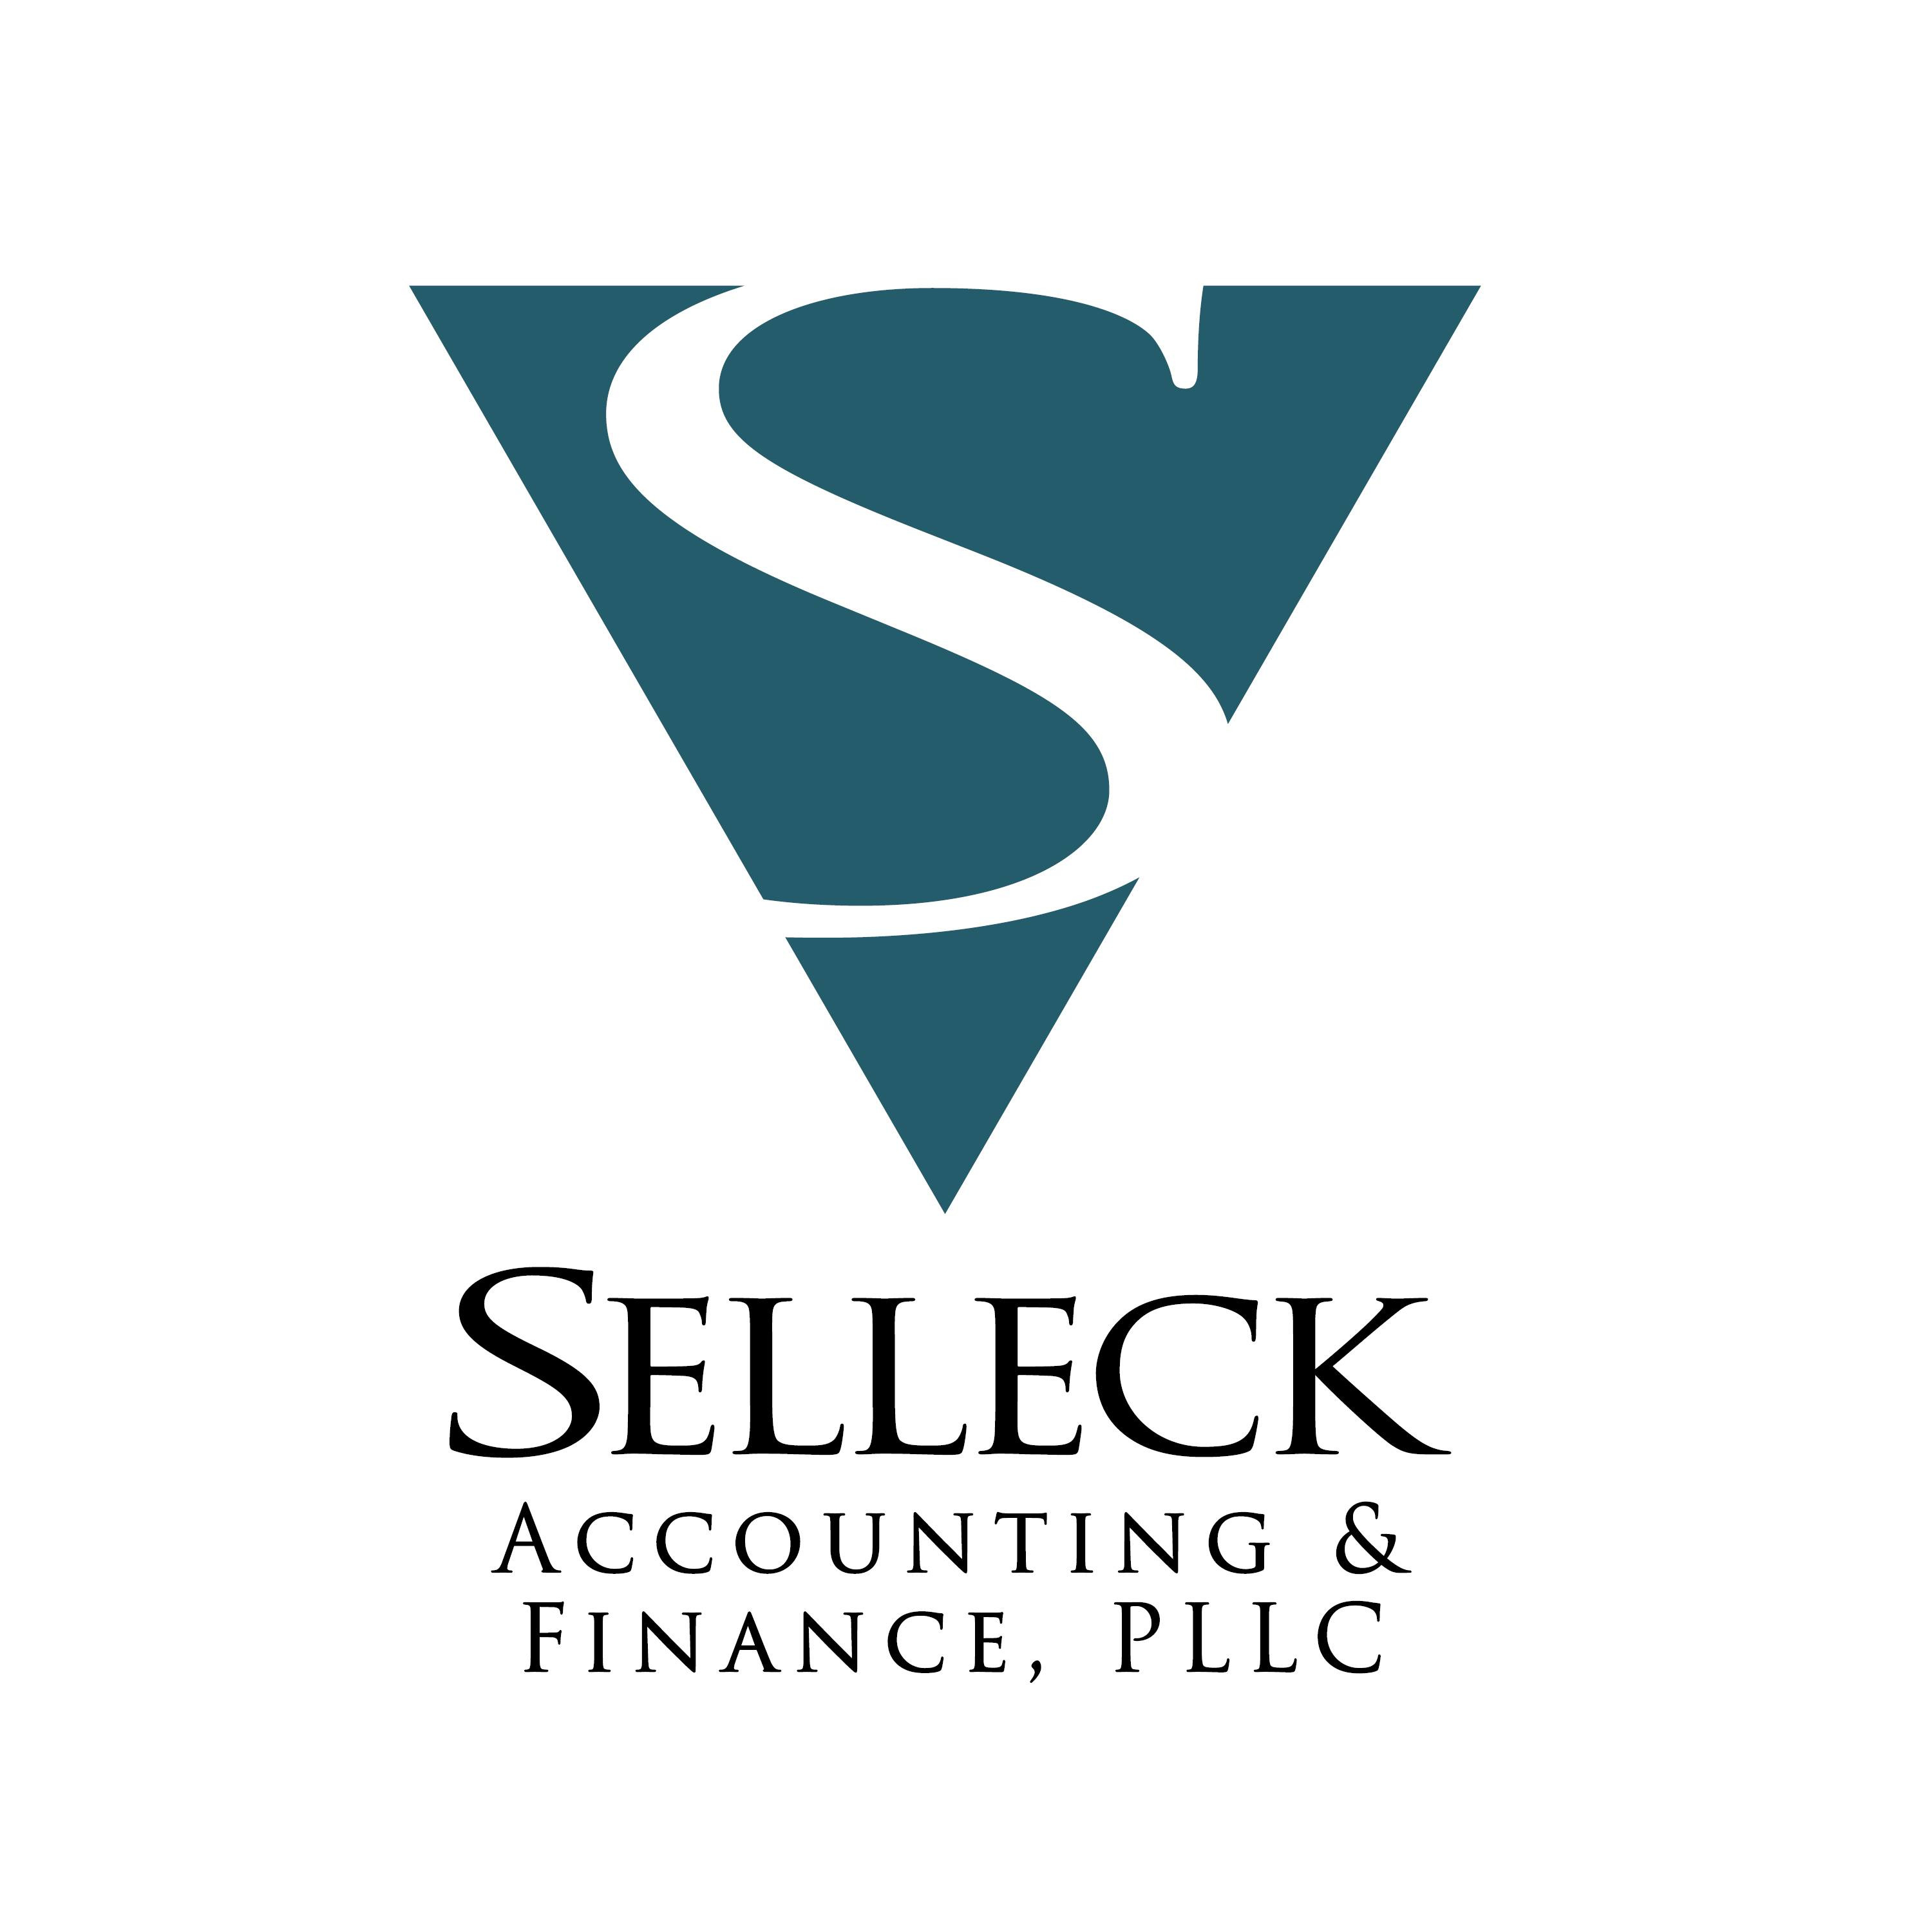 Selleck Accounting & Finance, PLLC